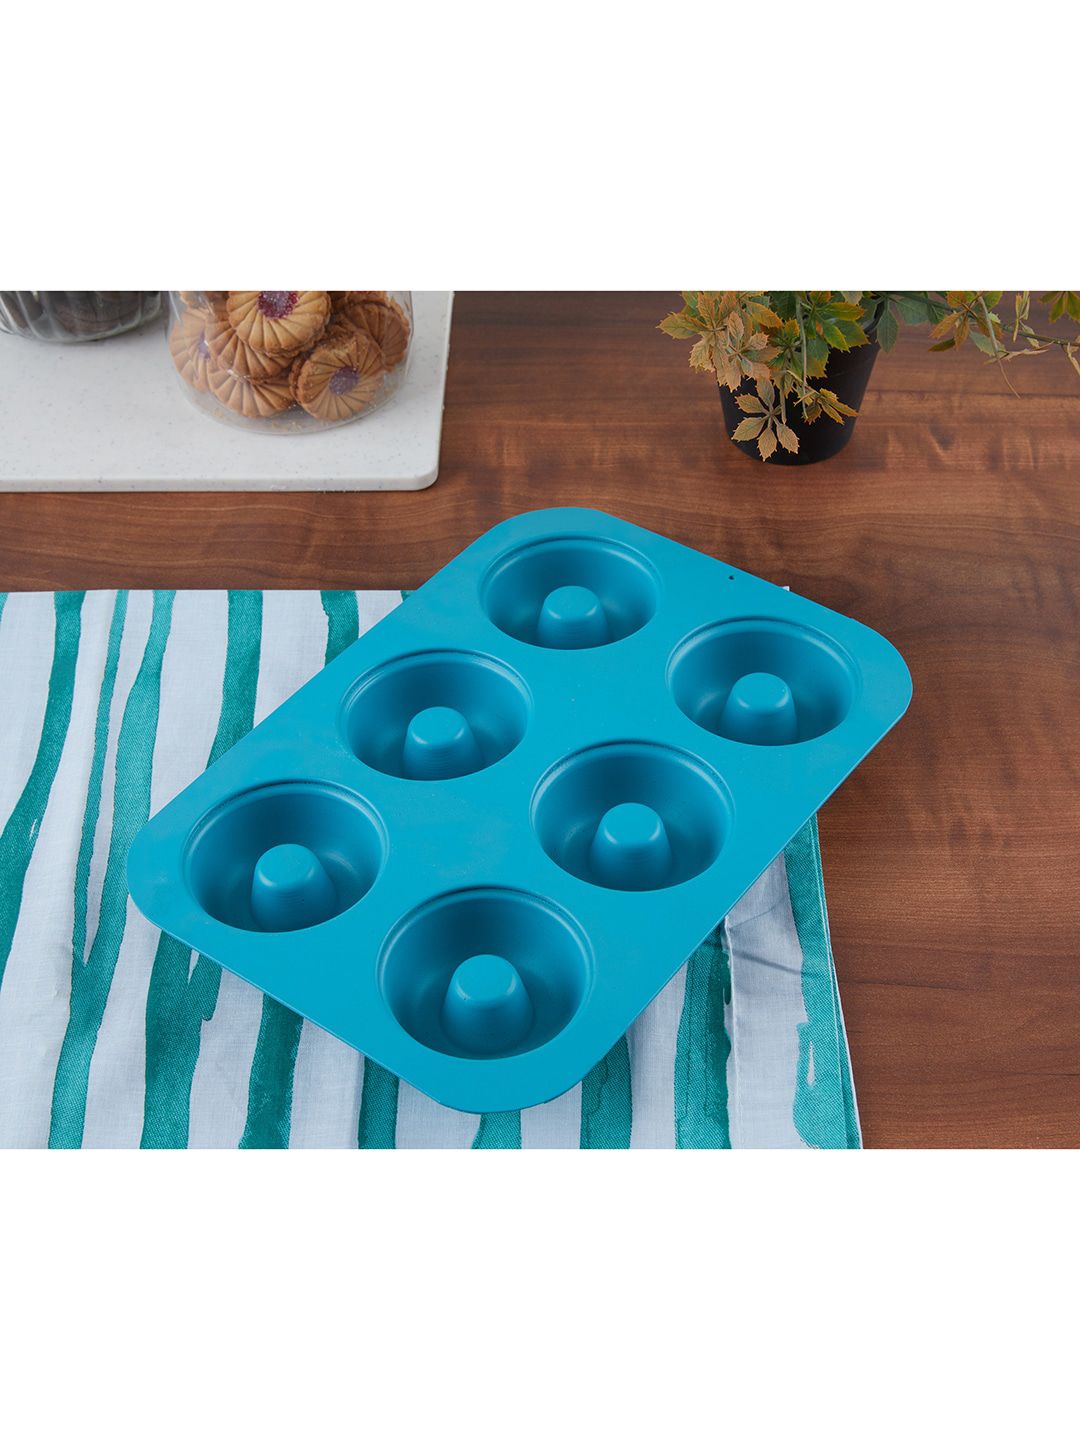 HomeTown Teal Blue Solid Aluminium 6 Cavity Donuts Baking Tray Price in India